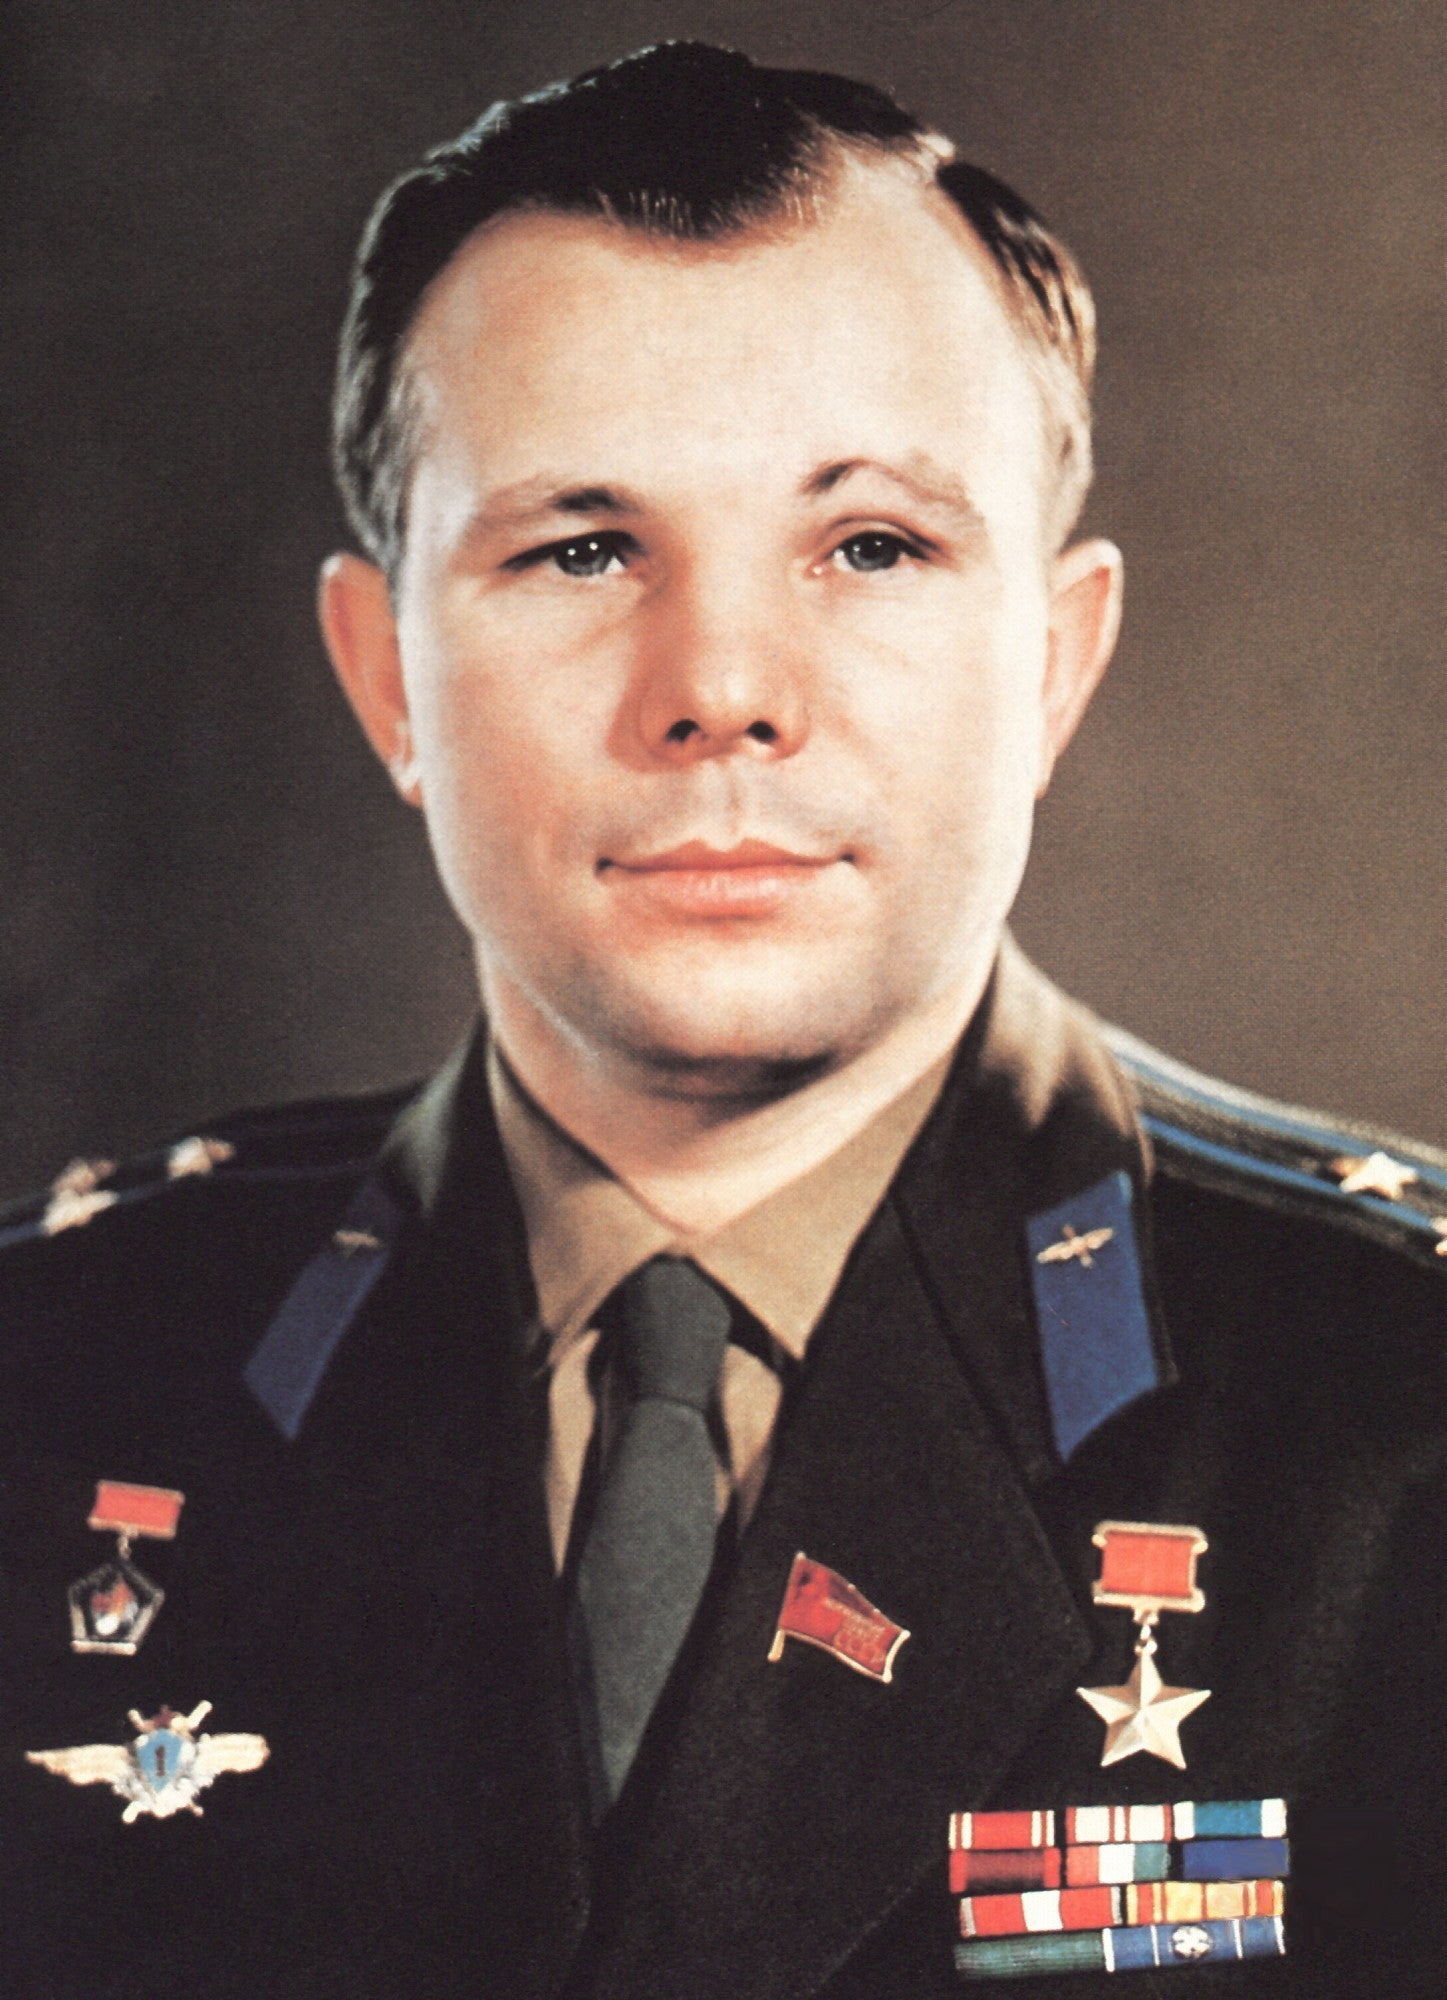 A photograph of Yuri Alexseyevich Gagarin, the first man in space and continued his military service becoming a Colonel in the Soviet Air Force before his aircraft accident on March 27, 1968.